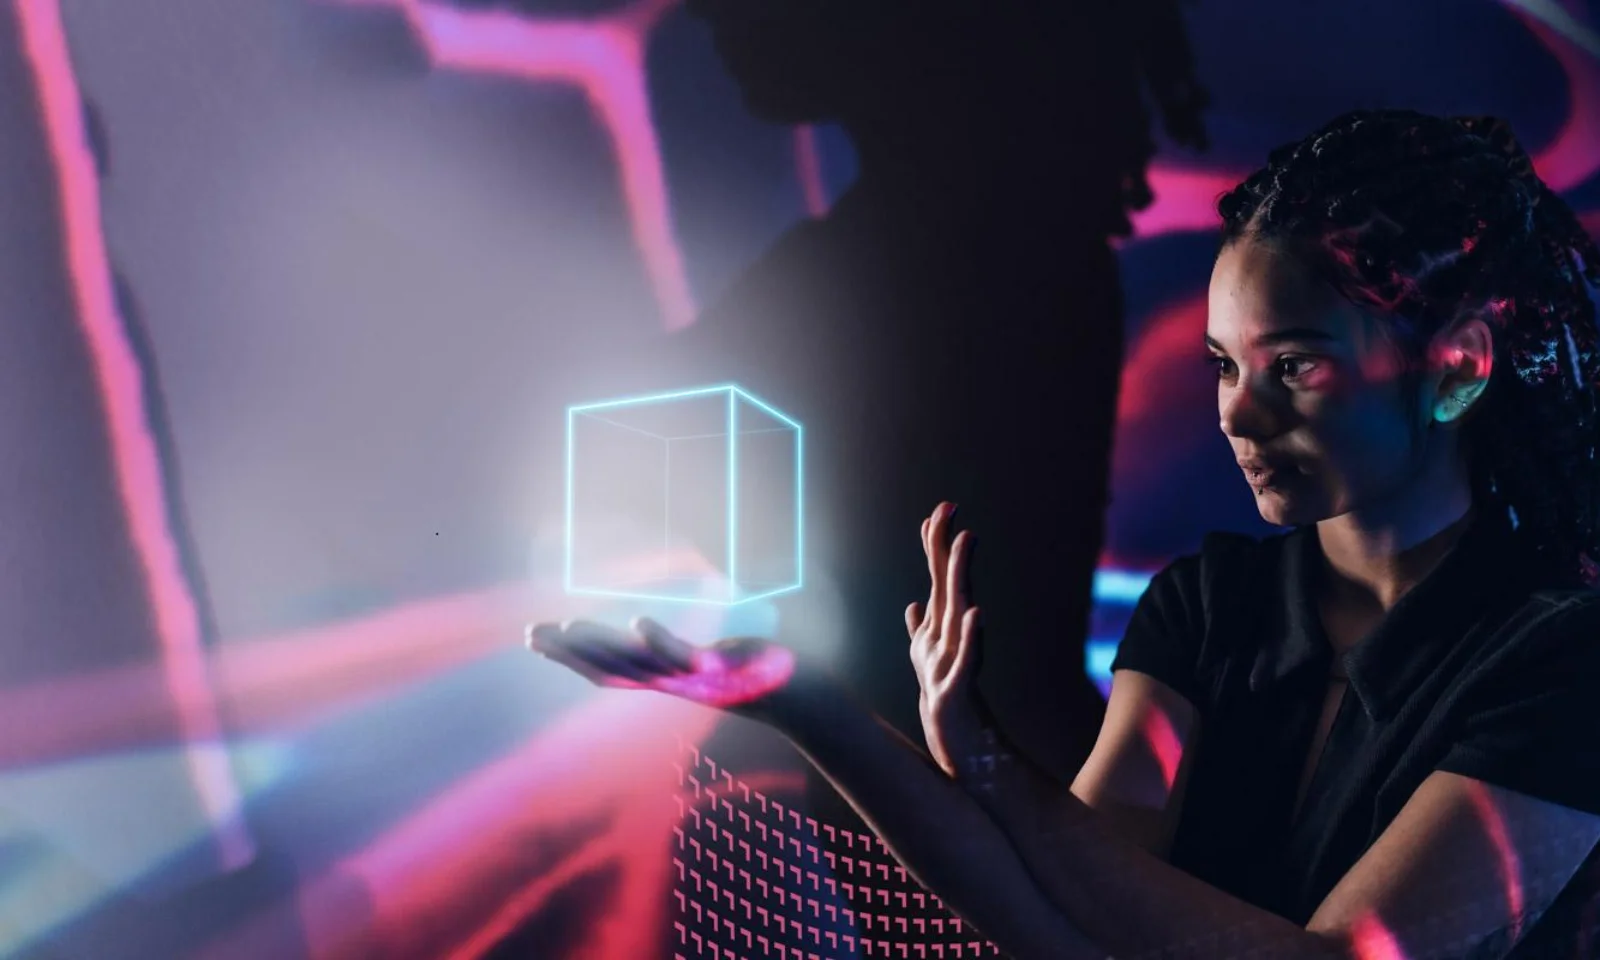 Get a sneak peek into the AI.DA Marketplace with this teaser image. Featuring a young woman engaging with a holographic cube, this visual symbolizes the innovative capabilities of the AI.DA platform. Perfect for highlighting the cutting-edge AI and data solutions offered in the marketplace, and attracting interest in the transformative potential of AI-driven technologies.